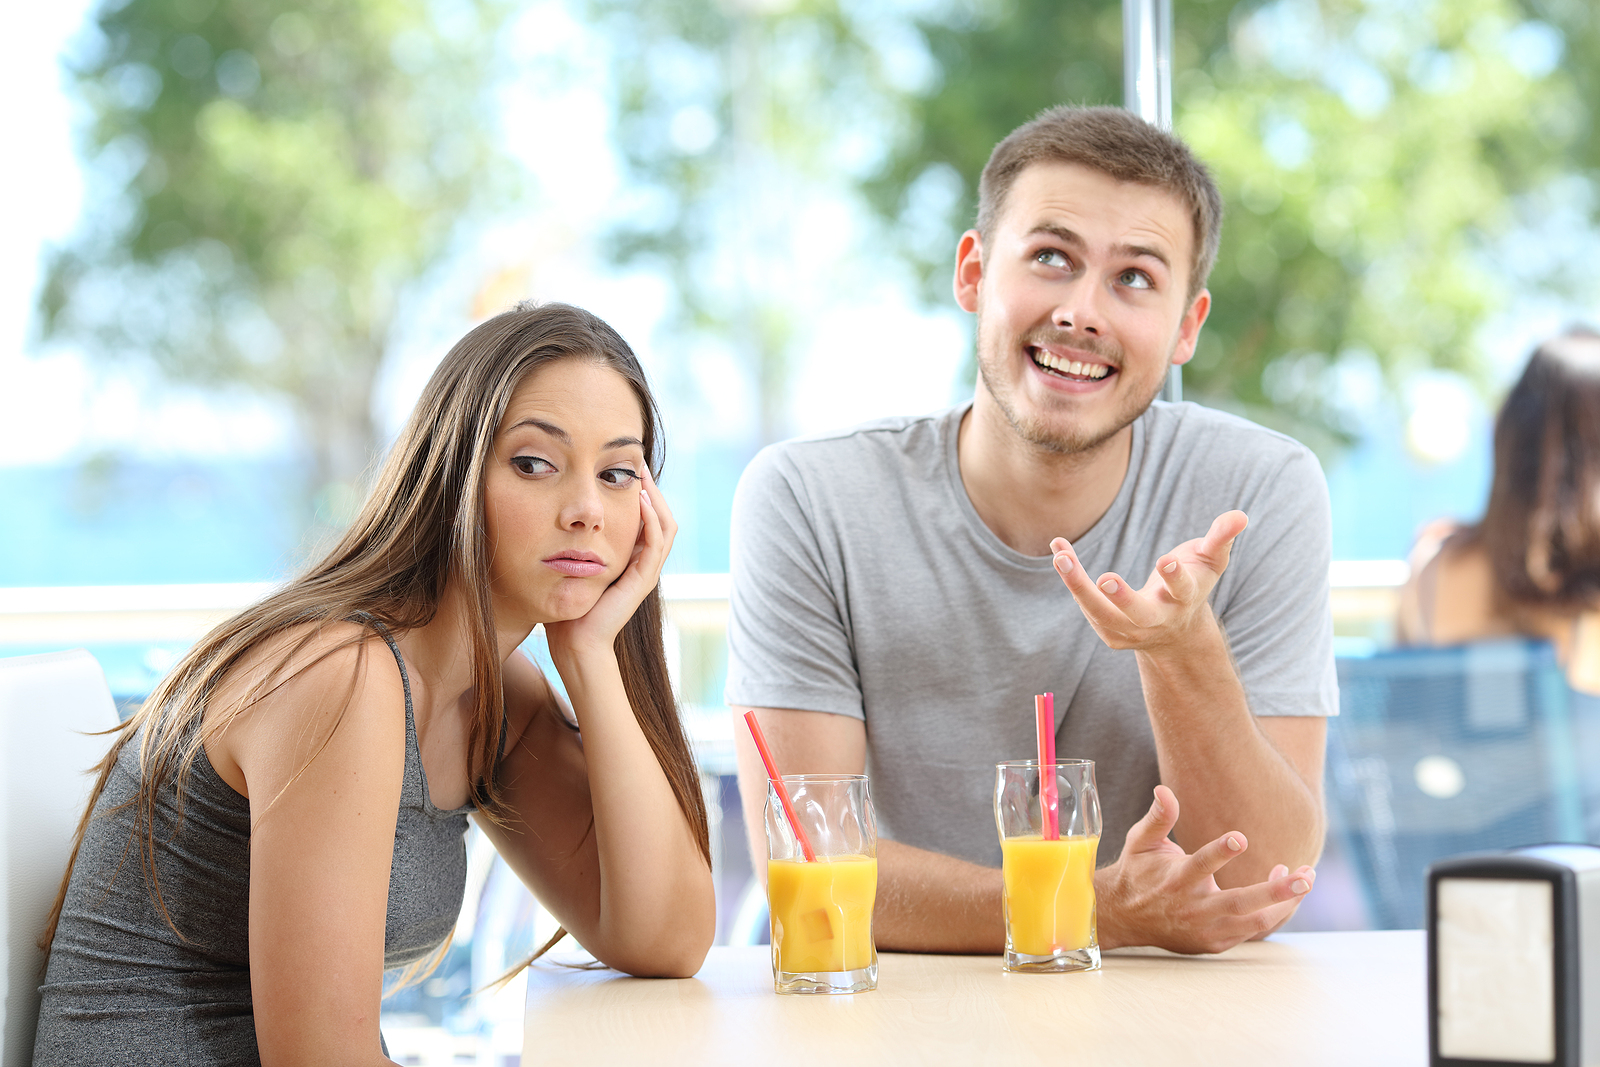 A young woman on a first date with a man looks annoyed to the side as he talks to her excitedly.